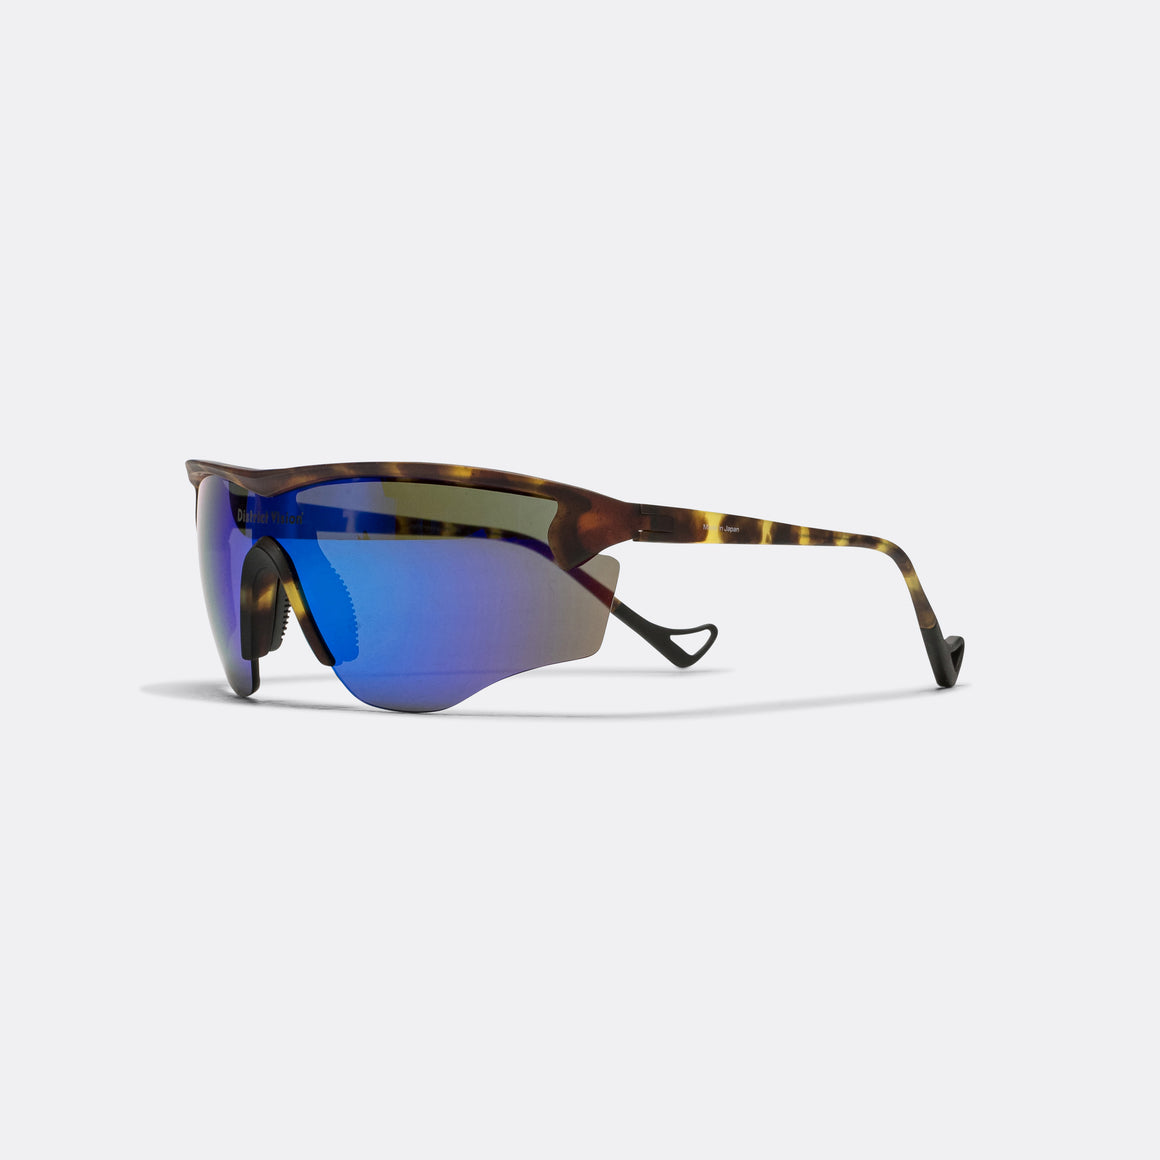 District Vision - Junya Racer - Tortoise/D+ Blue Mirror - Up There Athletics